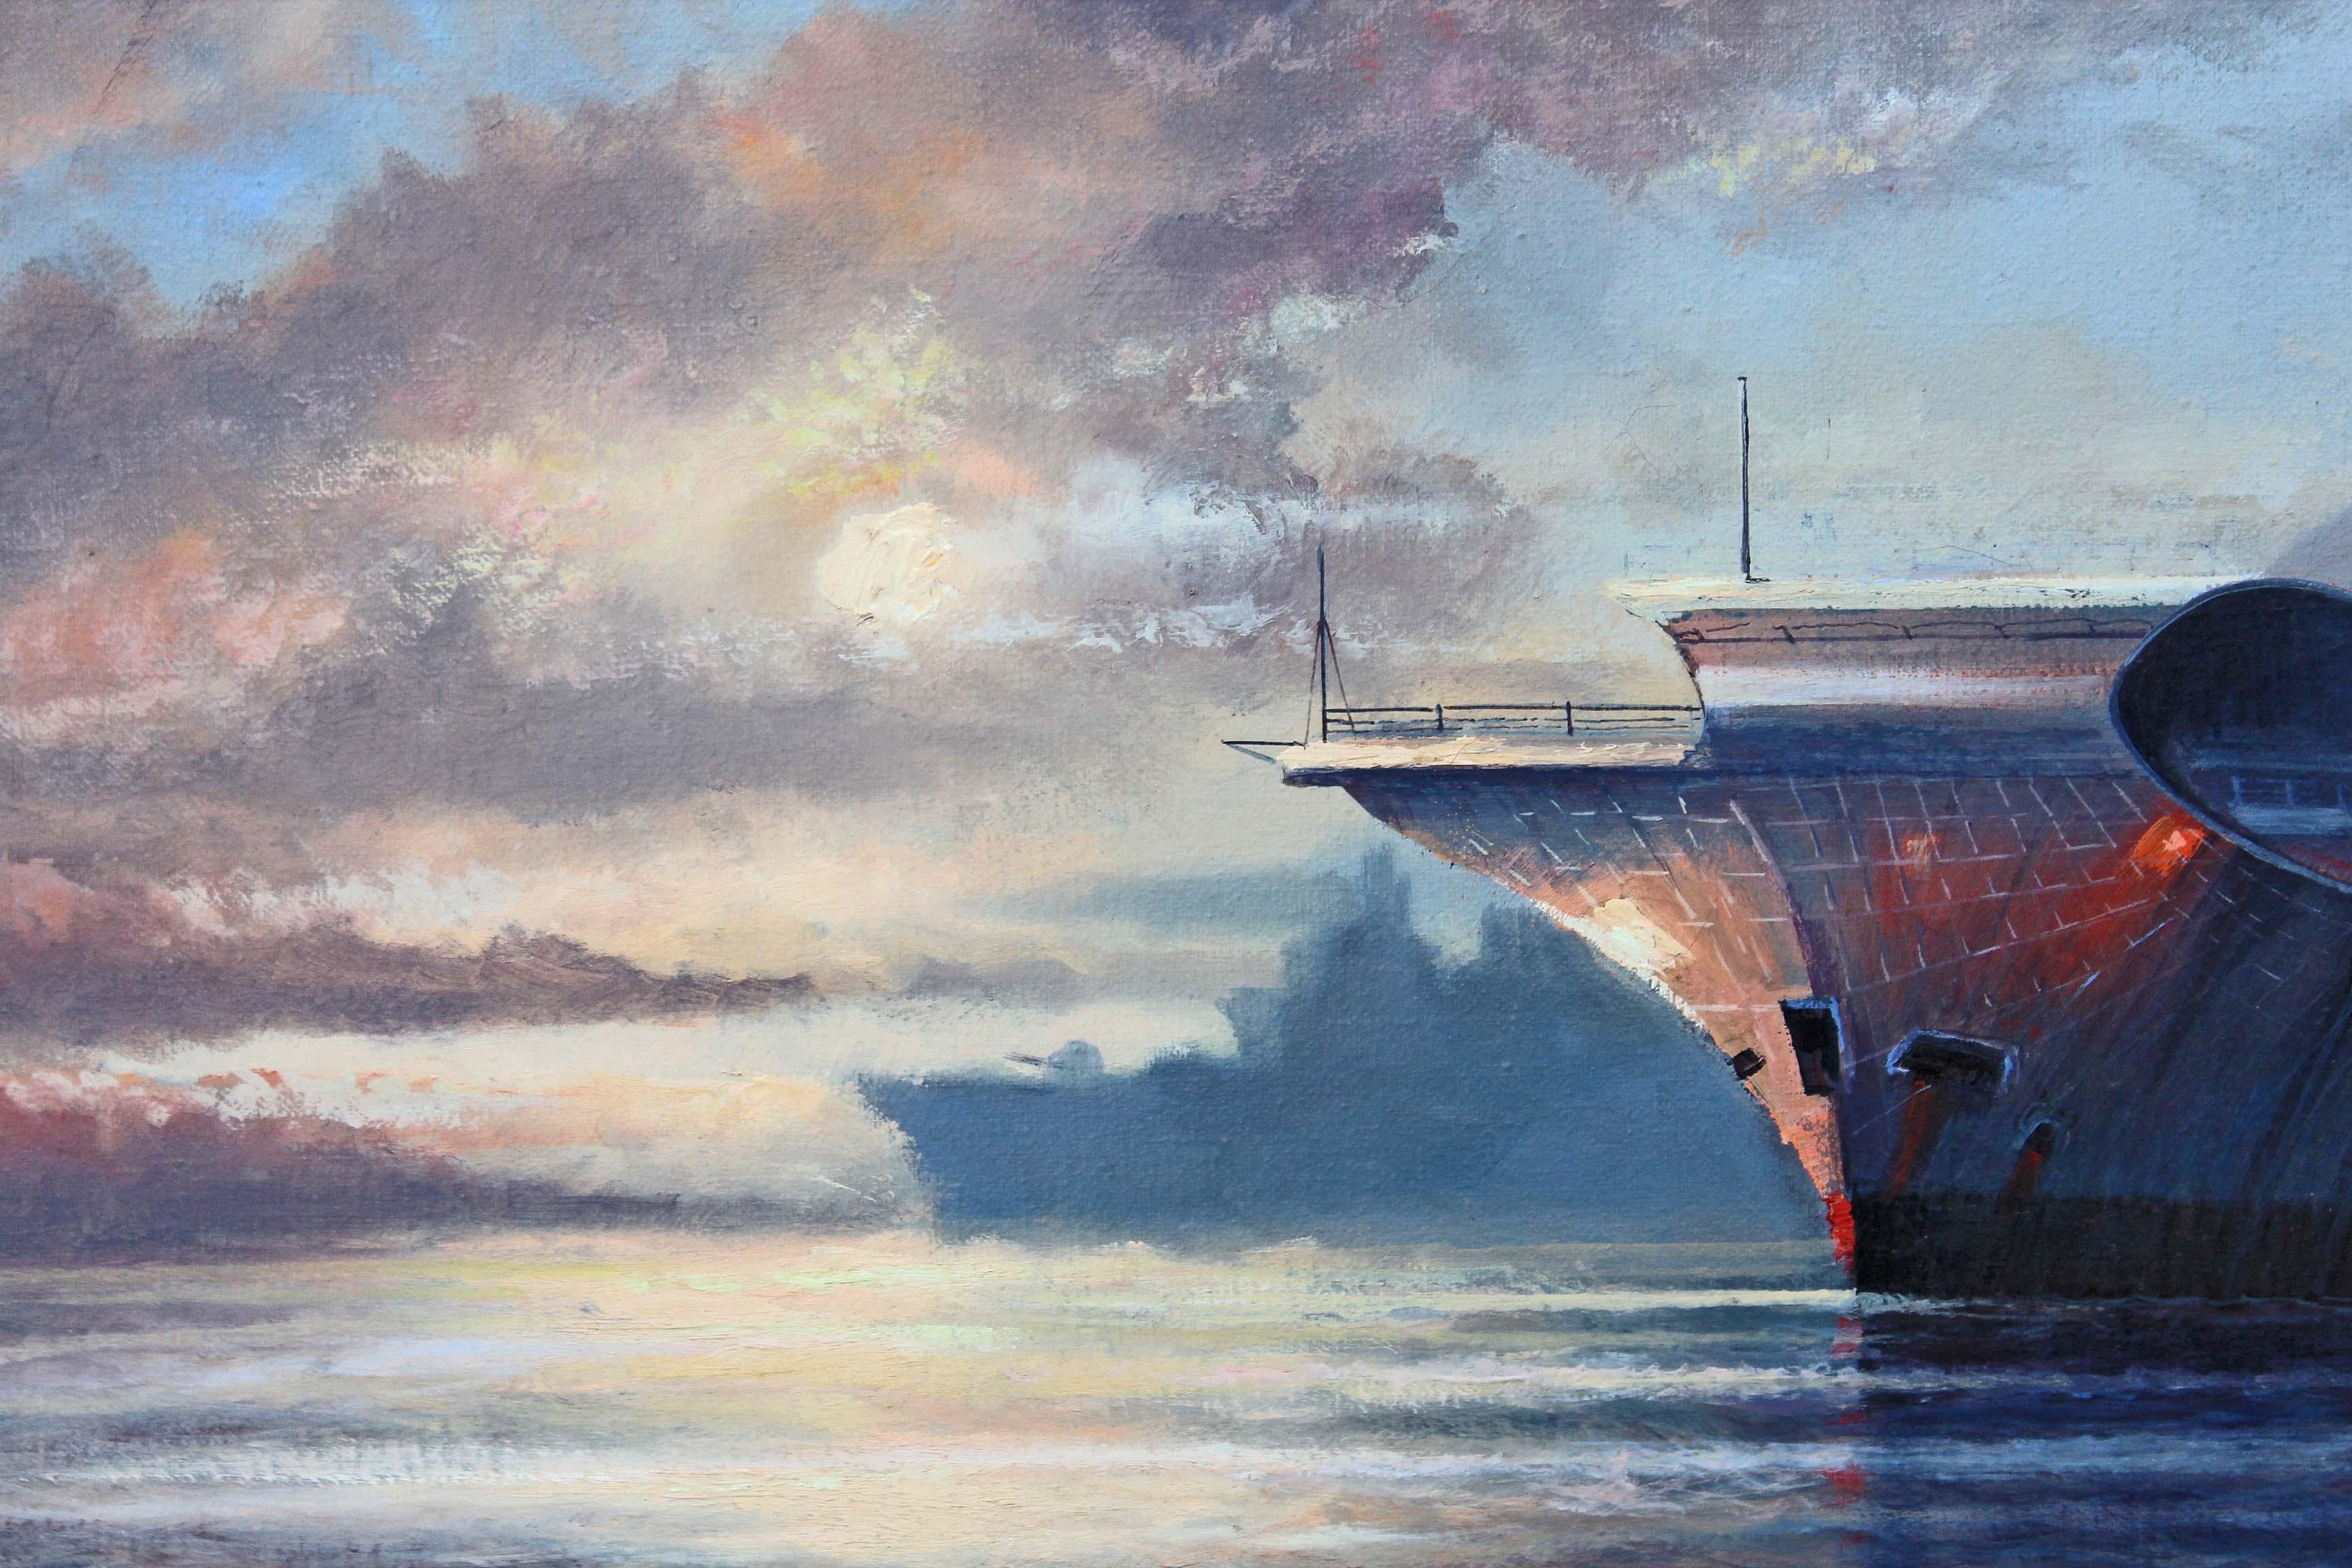 M J Whitehand's High-Quality Large Oil Painting of HMS Hermes Aircraft Carrier For Sale 4